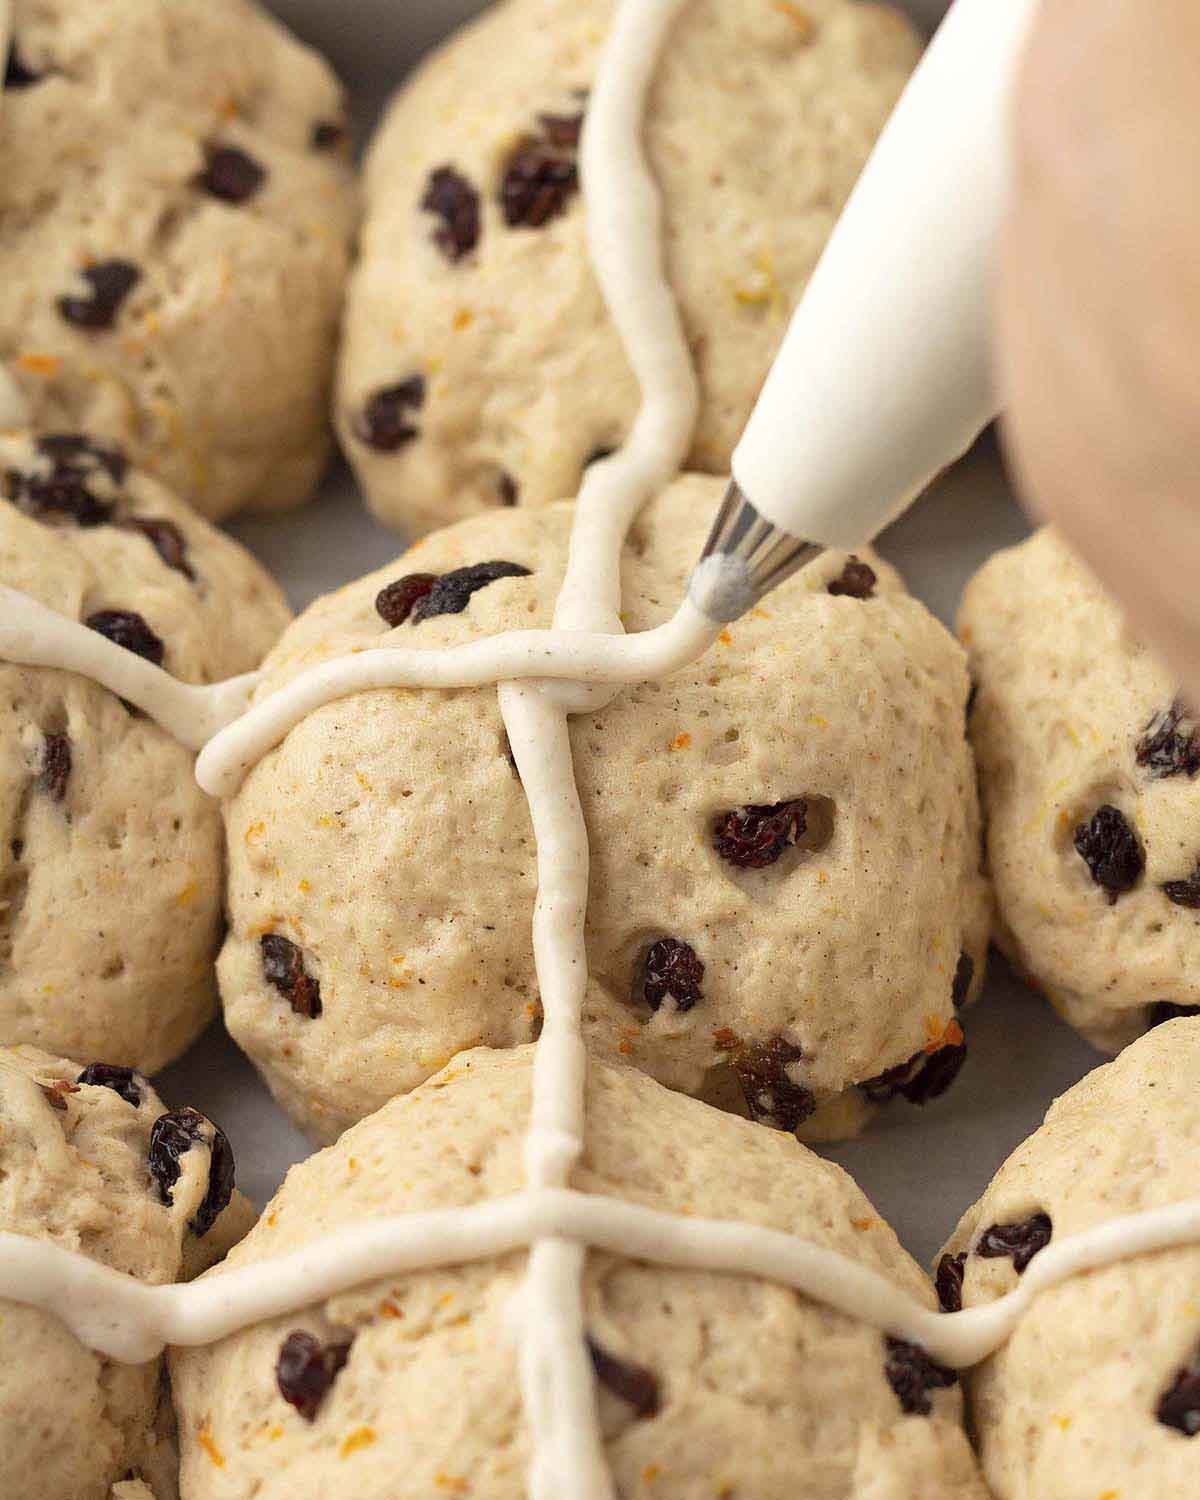 Image showing the flour crosses being piped onto gluten-free Easter cross buns.